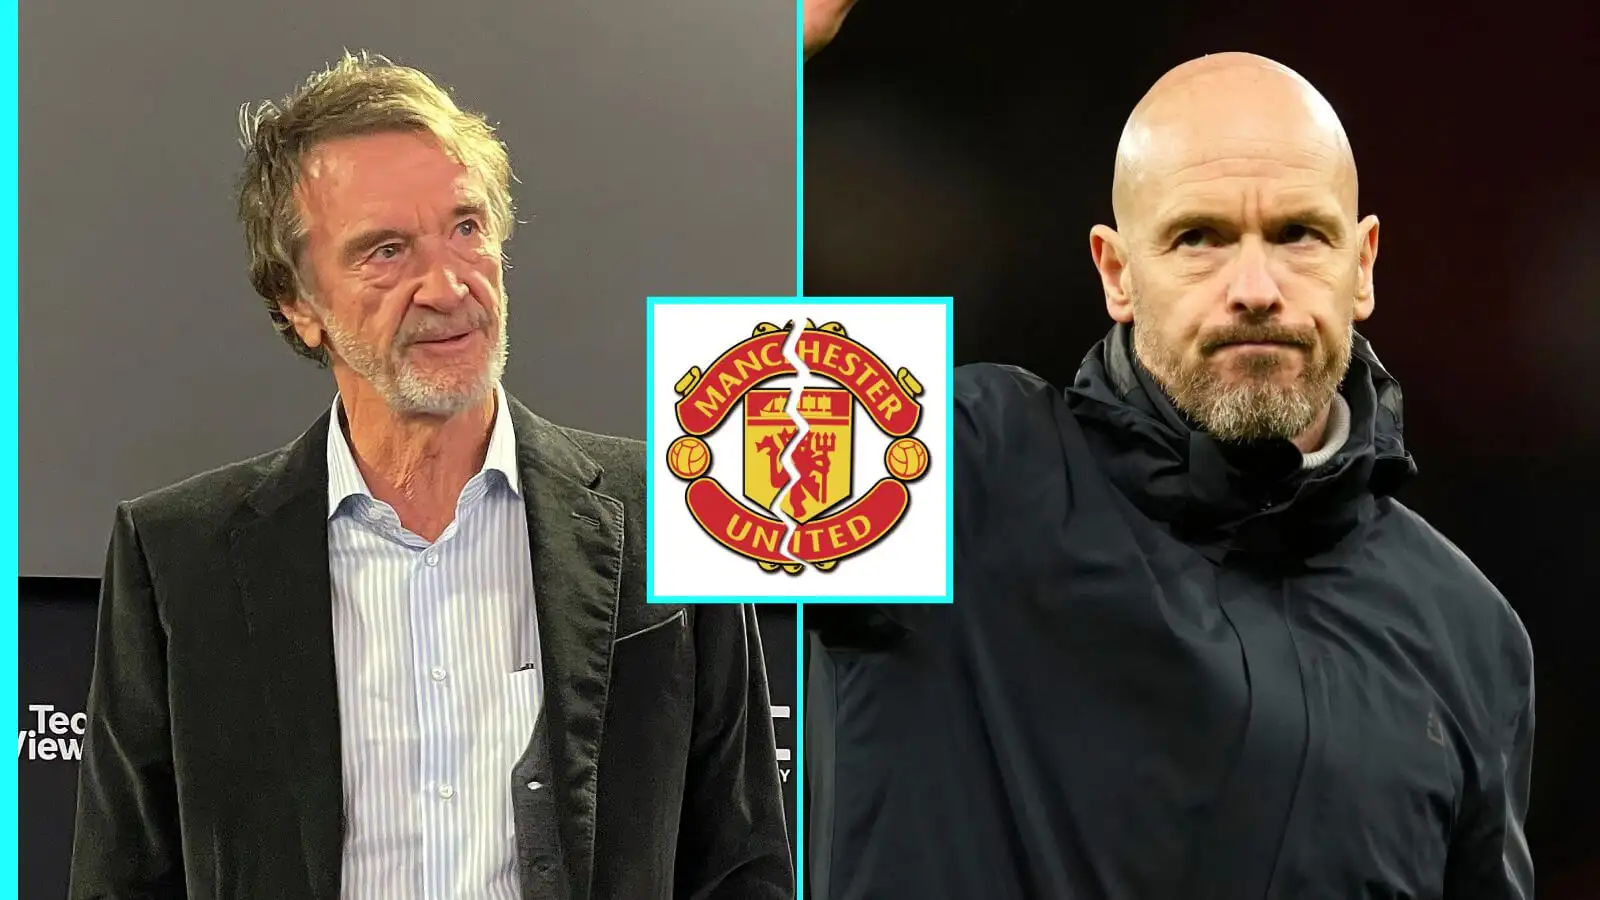 Sir Jim Ratcliffe and also Erik 10 Hag via the Manchester Joined badge